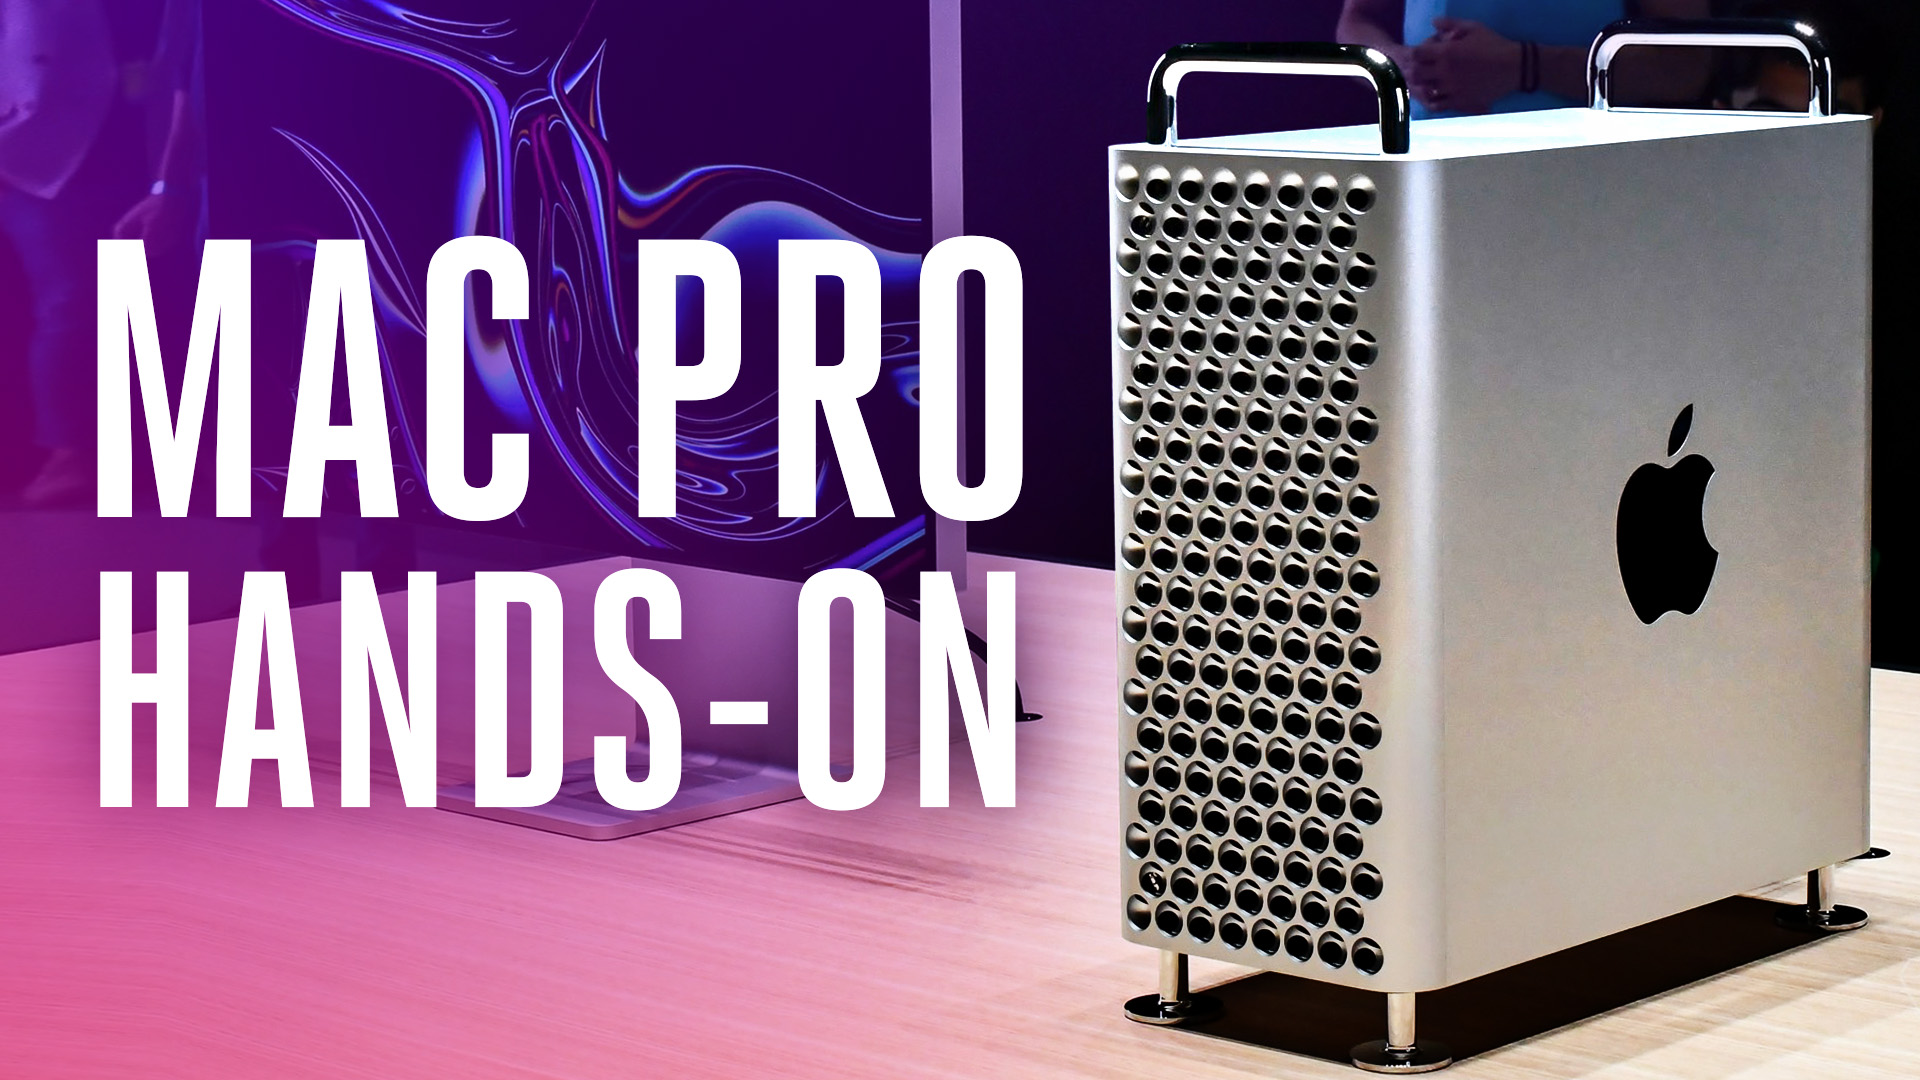 Here's what creatives think of the new Mac Pro - The Verge